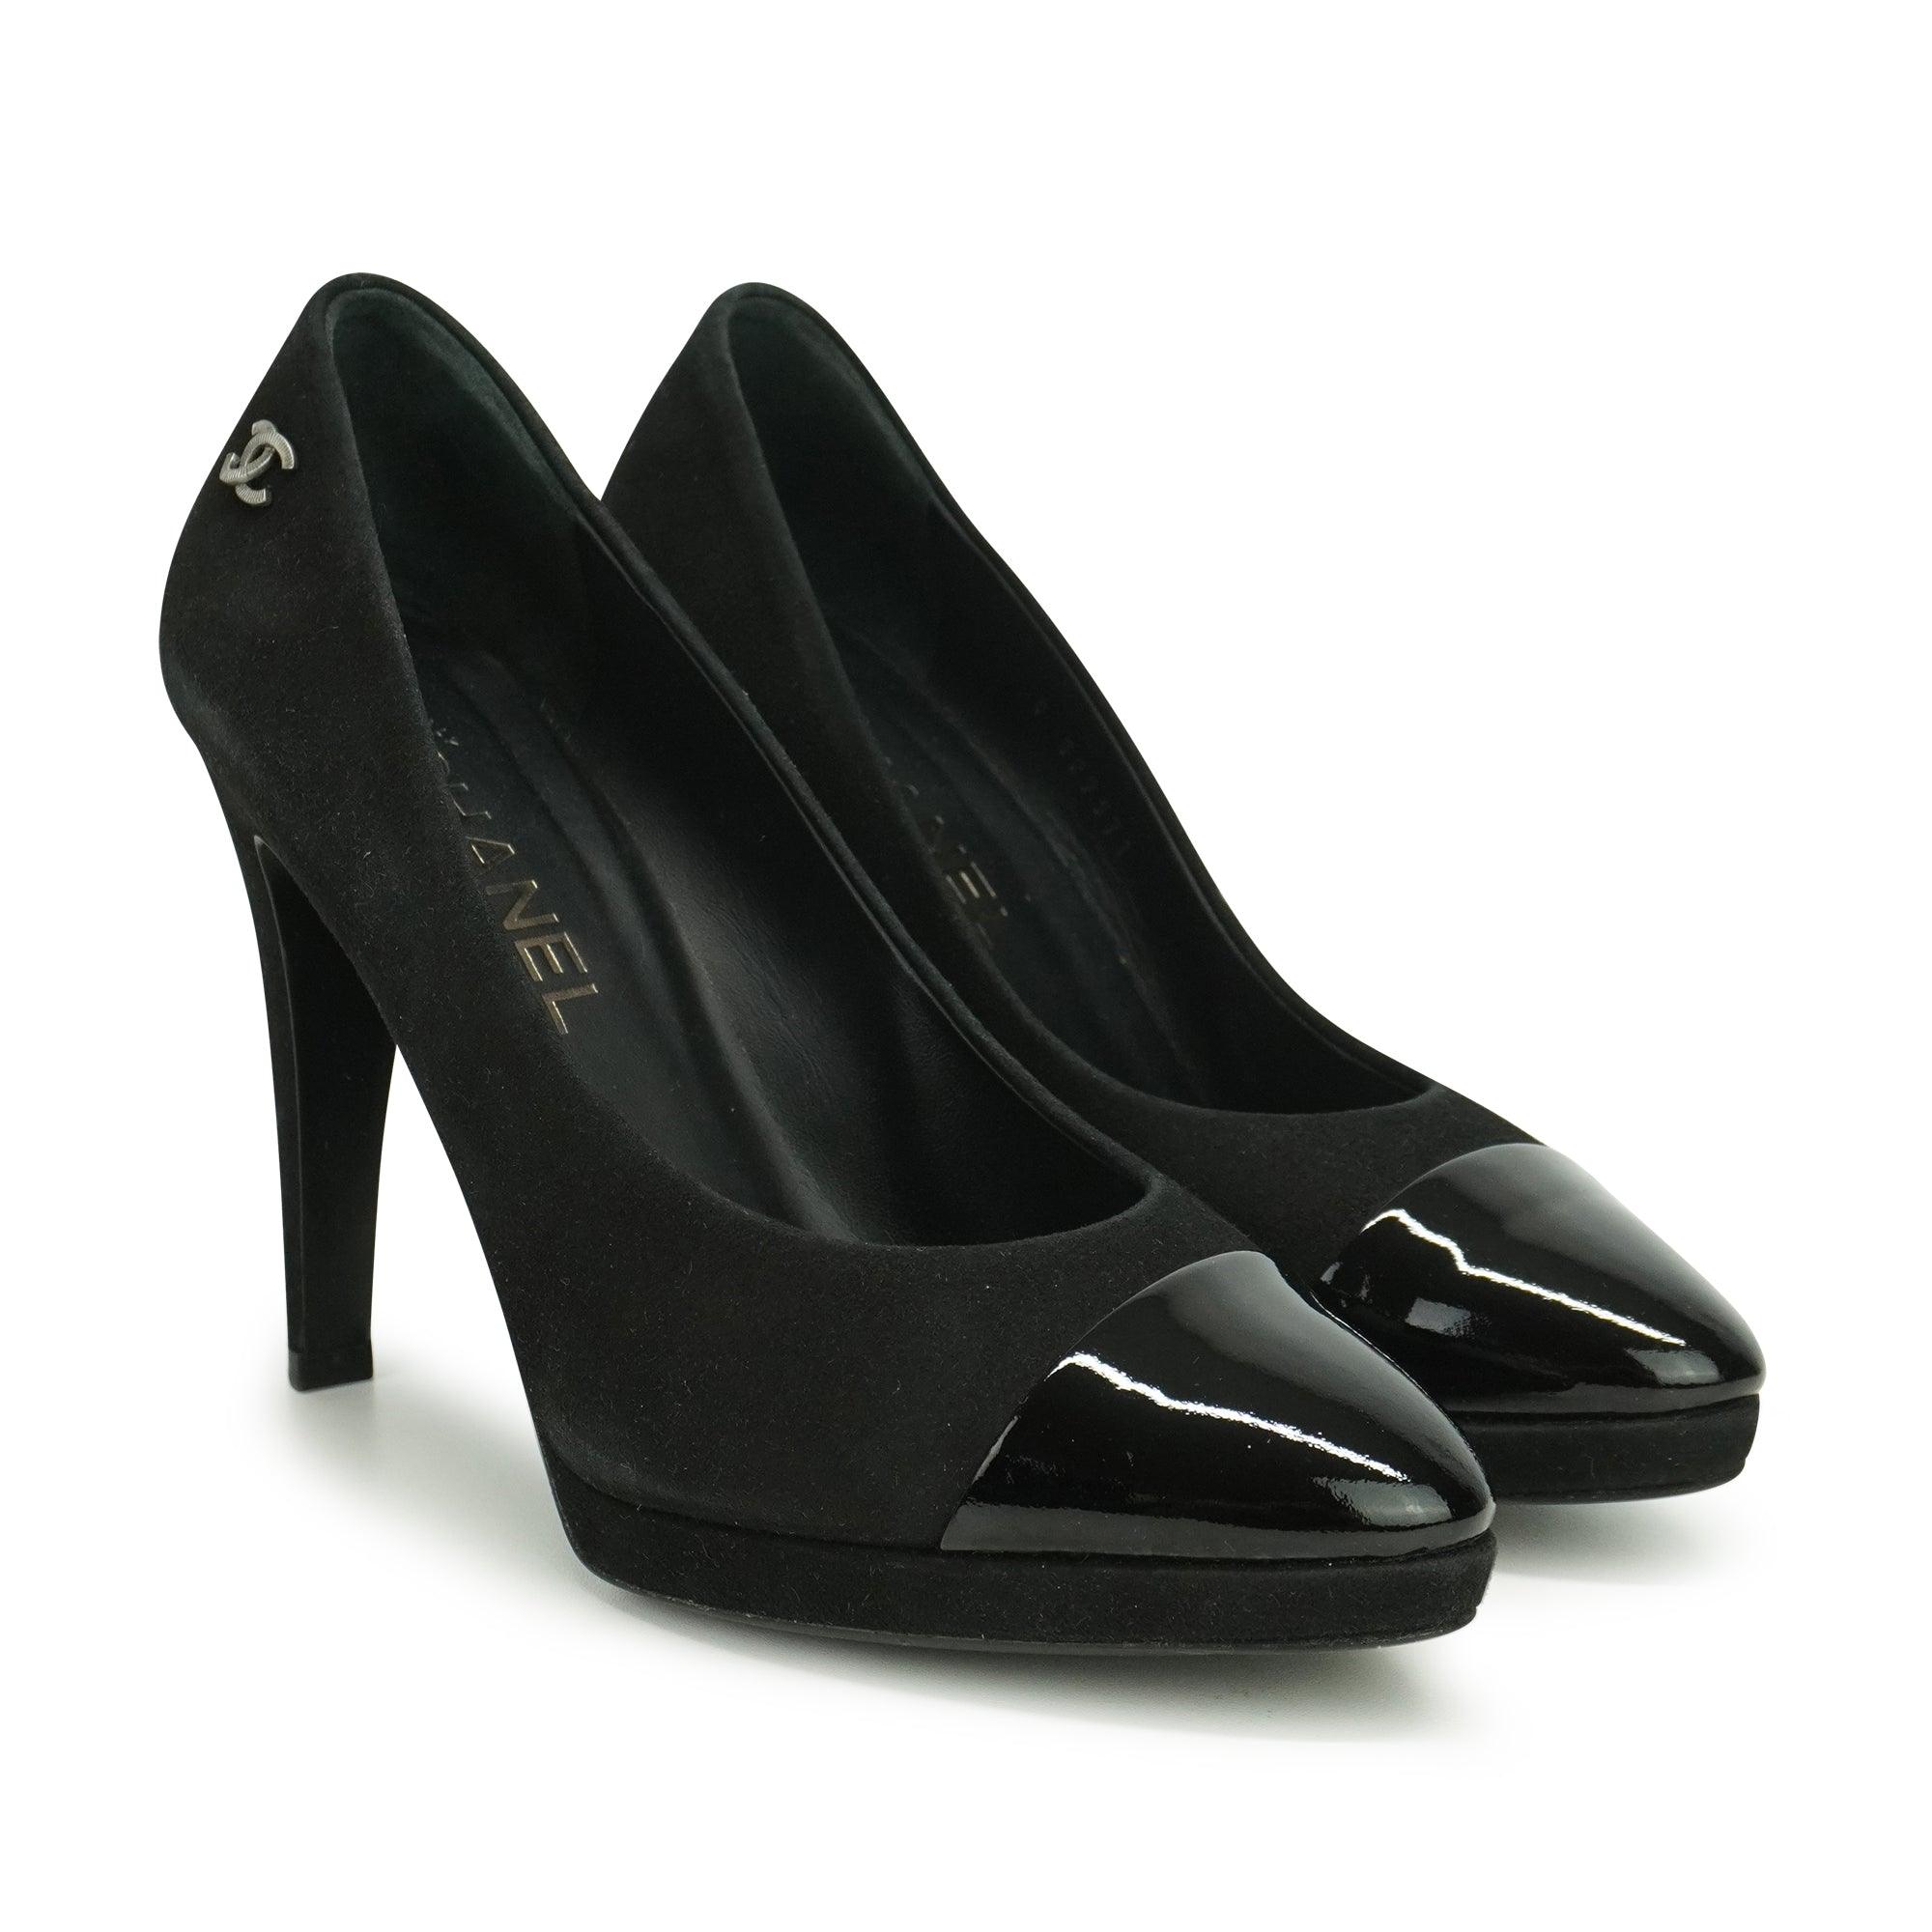 Chanel Pumps - Women's 38.5 - Fashionably Yours